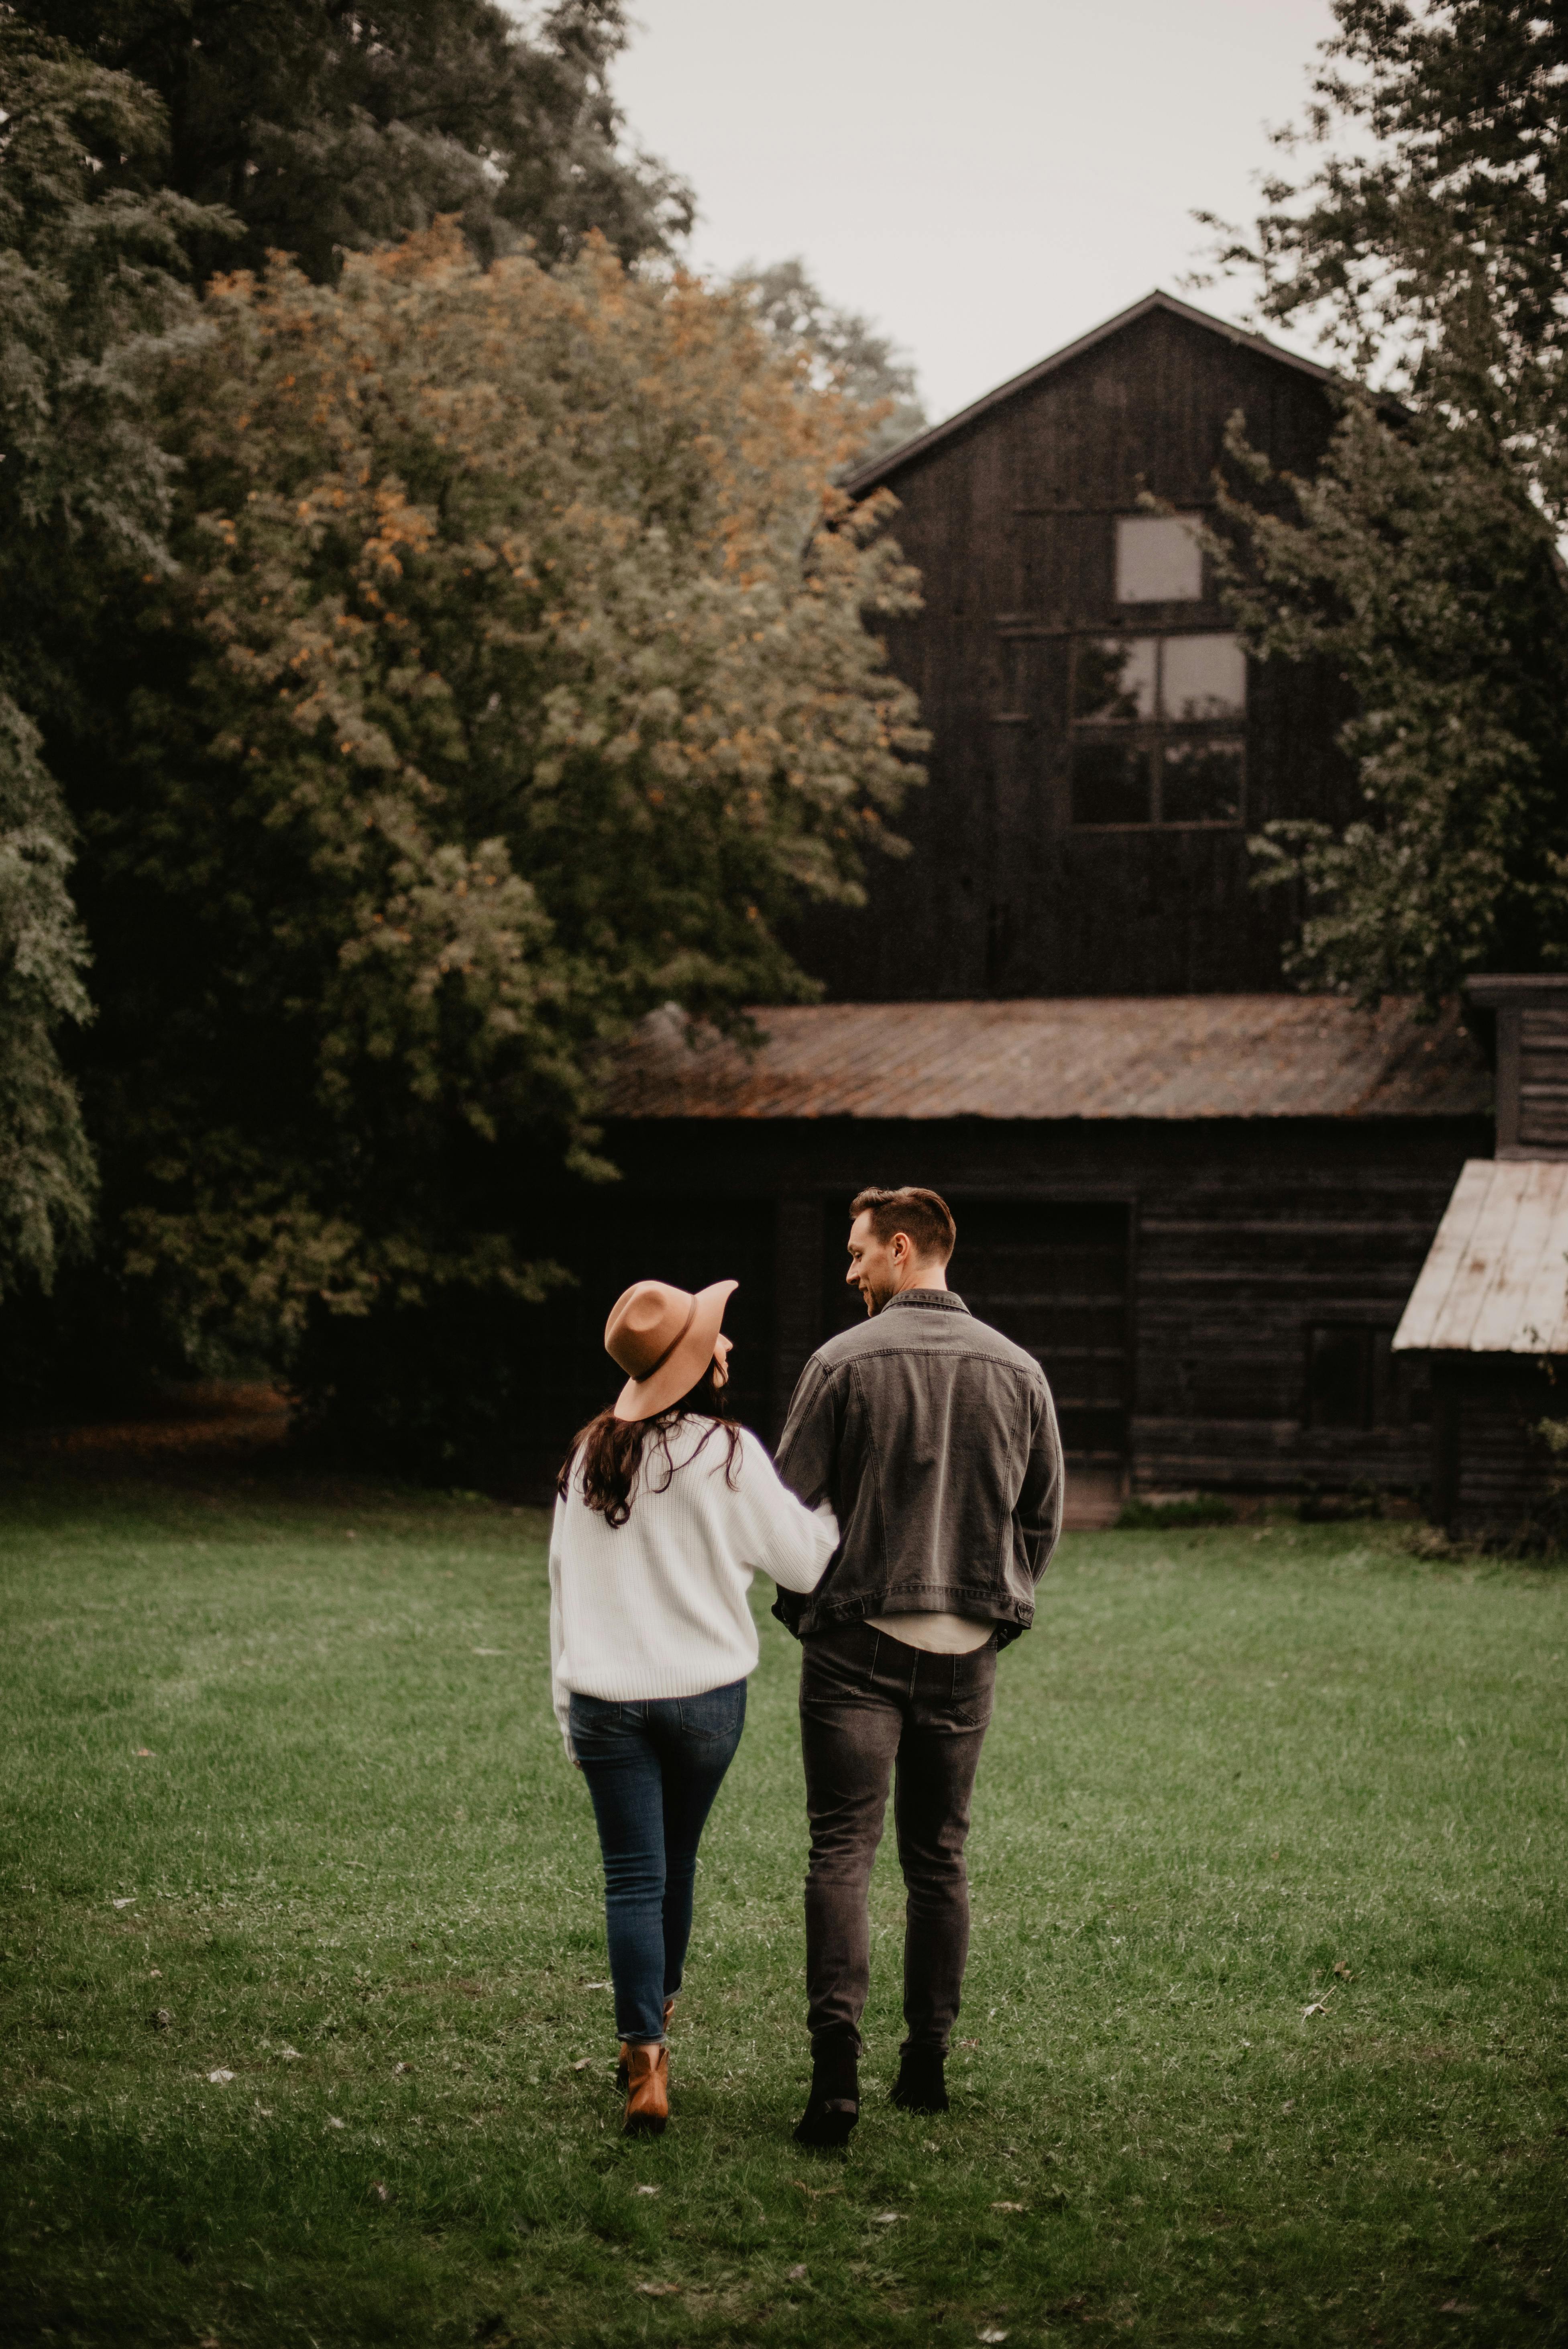 A man and a woman standing on green grass | Source: Pexels